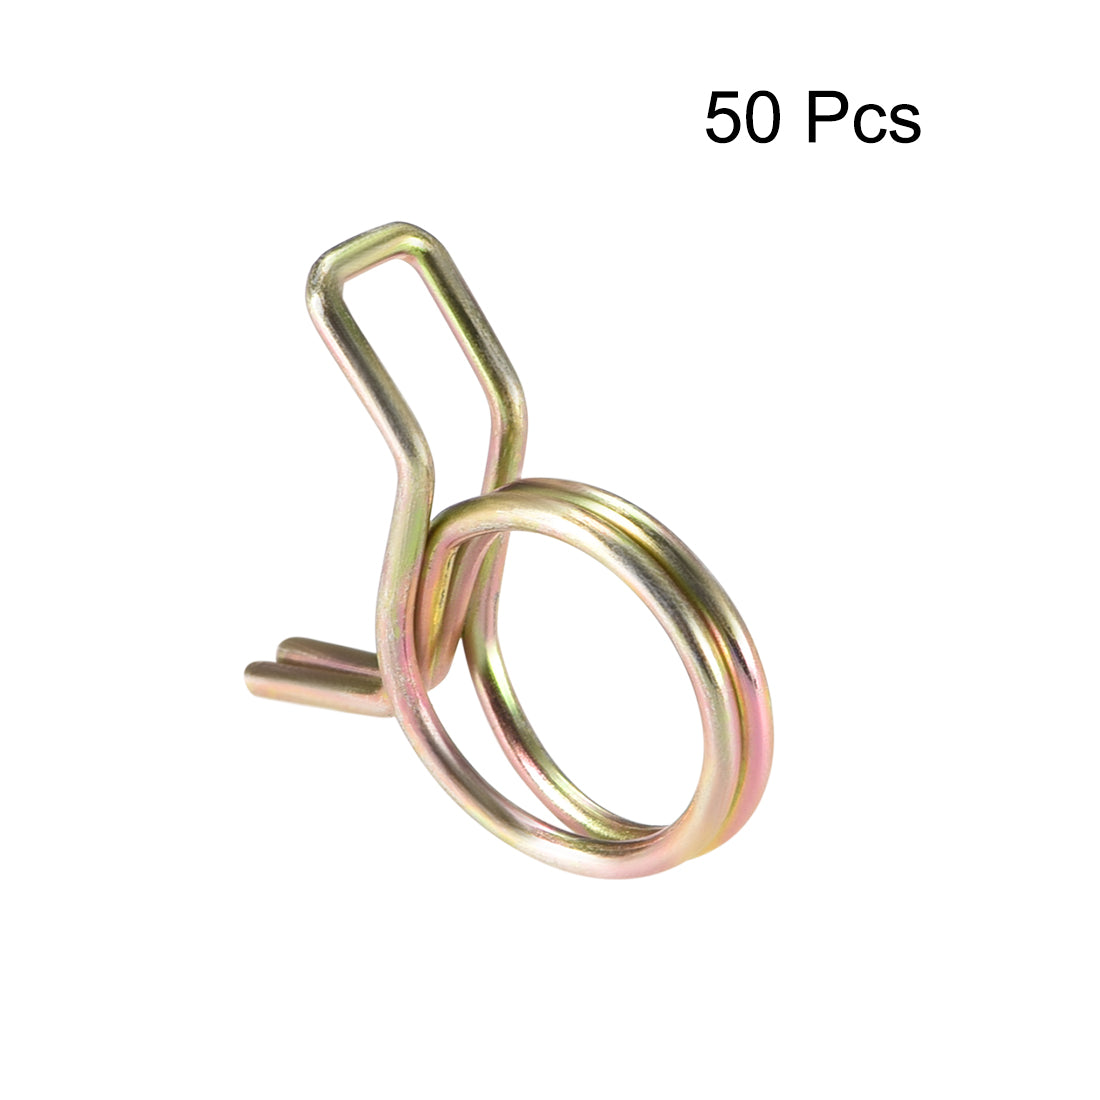 uxcell Uxcell Double Wire Spring Hose Clamp 10mm Fuel Line Tube Spring Clips Zinc Plated 50Pcs